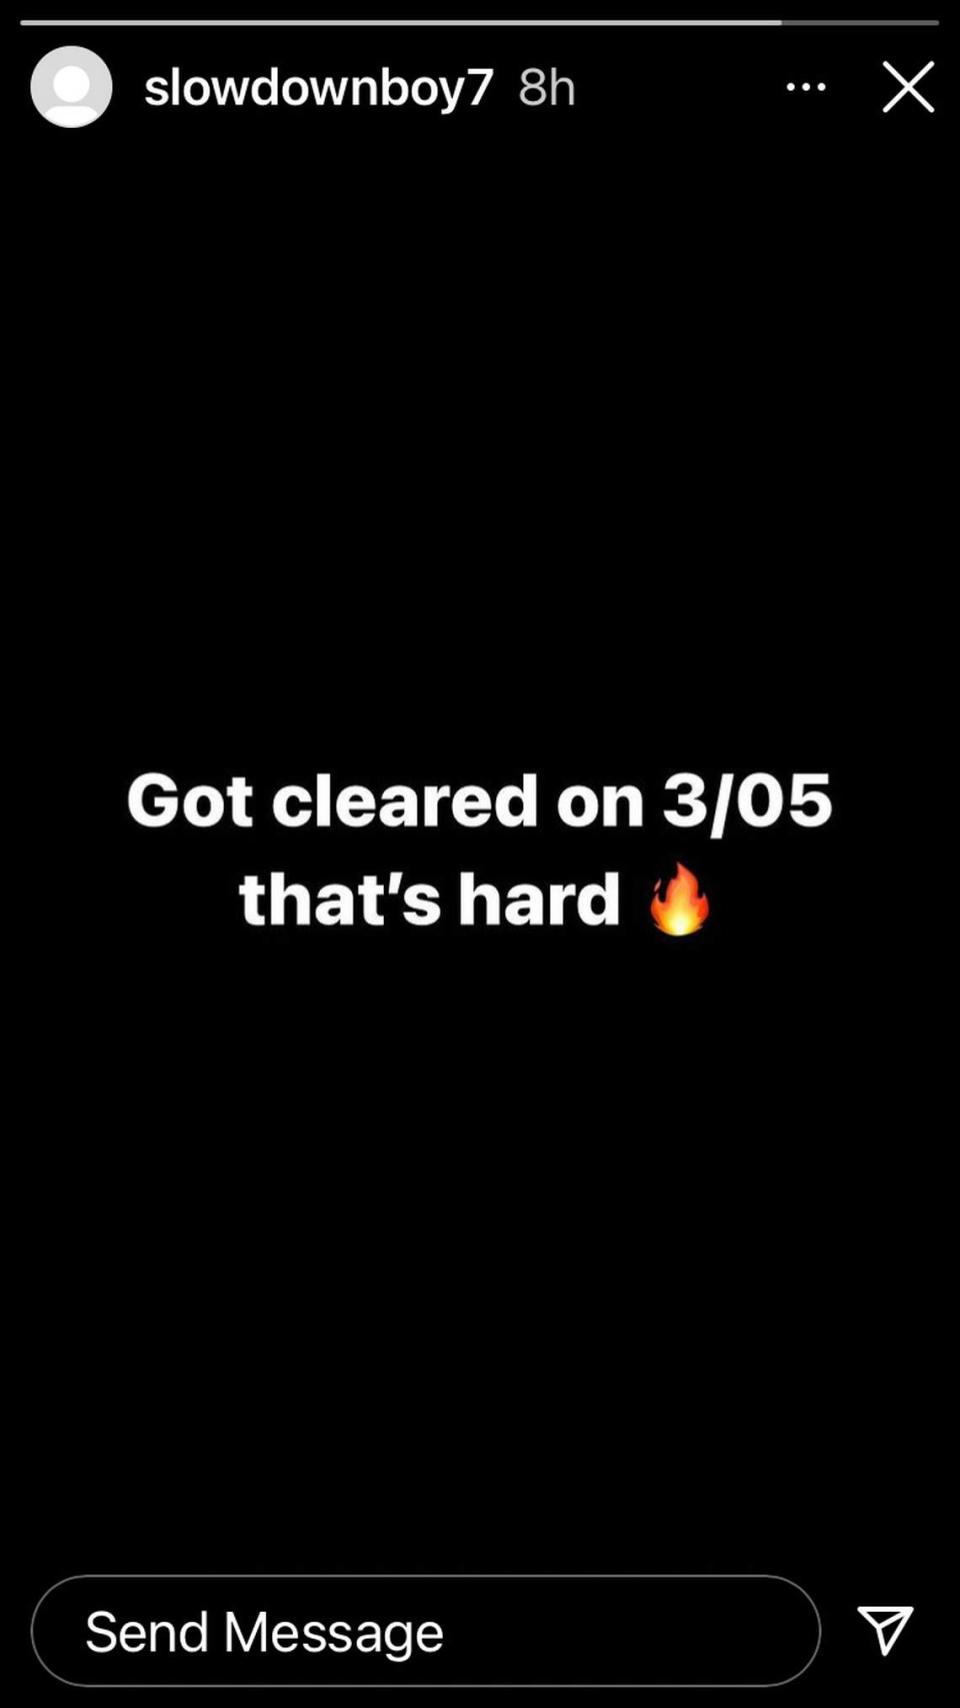 Avantae Williams, the nation’s No. 1 2020 safety recruit according to Rivals, posted this on Instagram on March 5, 2021 after sitting out the 2020 season with a medical issue.